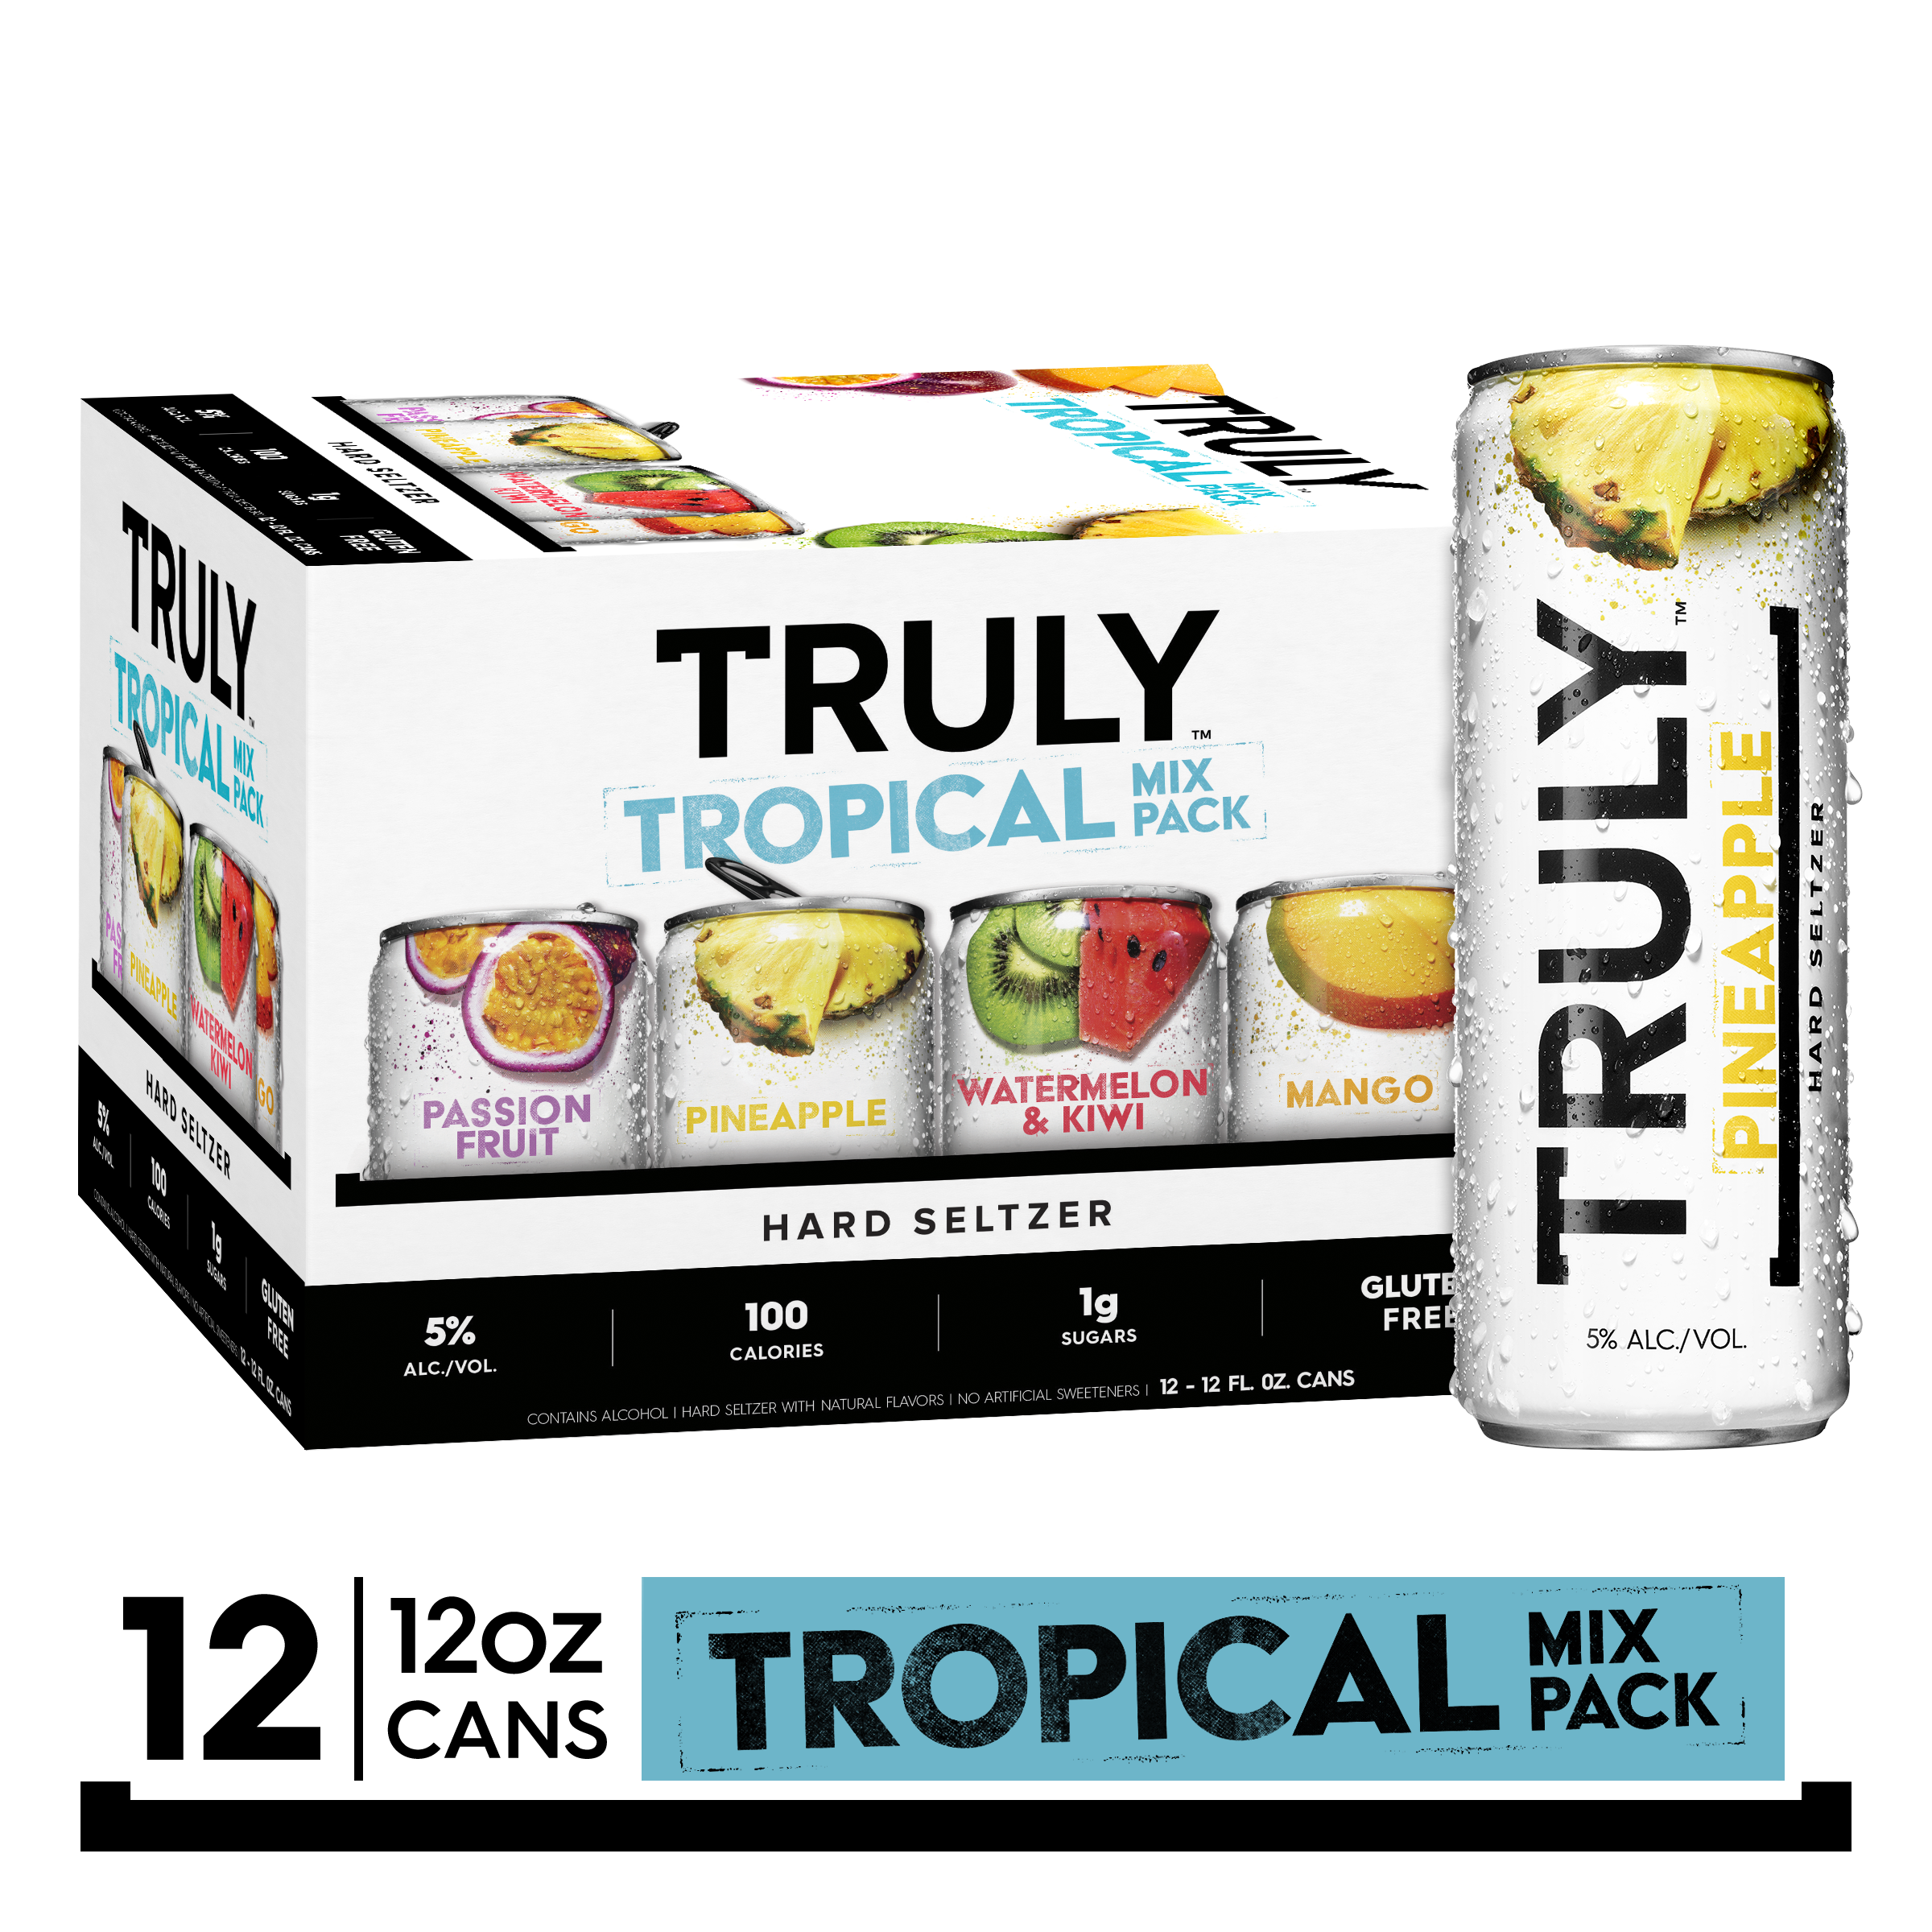 TRULY Hard Seltzer Tropical Variety, 12pk, 12oz beer white ...